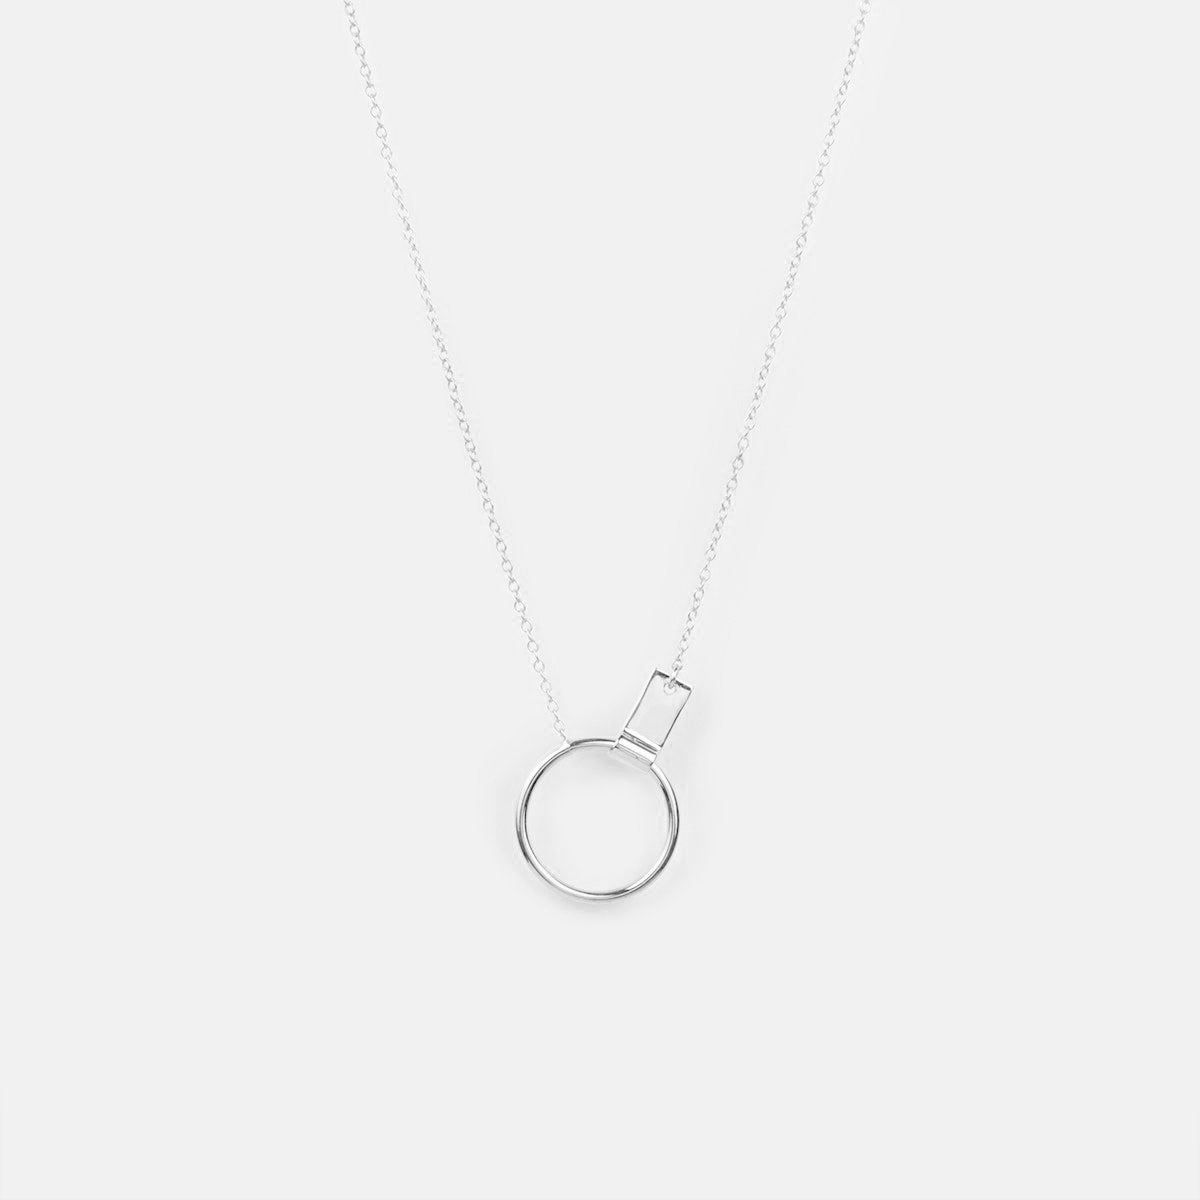 PROJECT50G |Silver Textured Round Medallion with Unusual Handmade Link  Combination and Black Chain – project50g